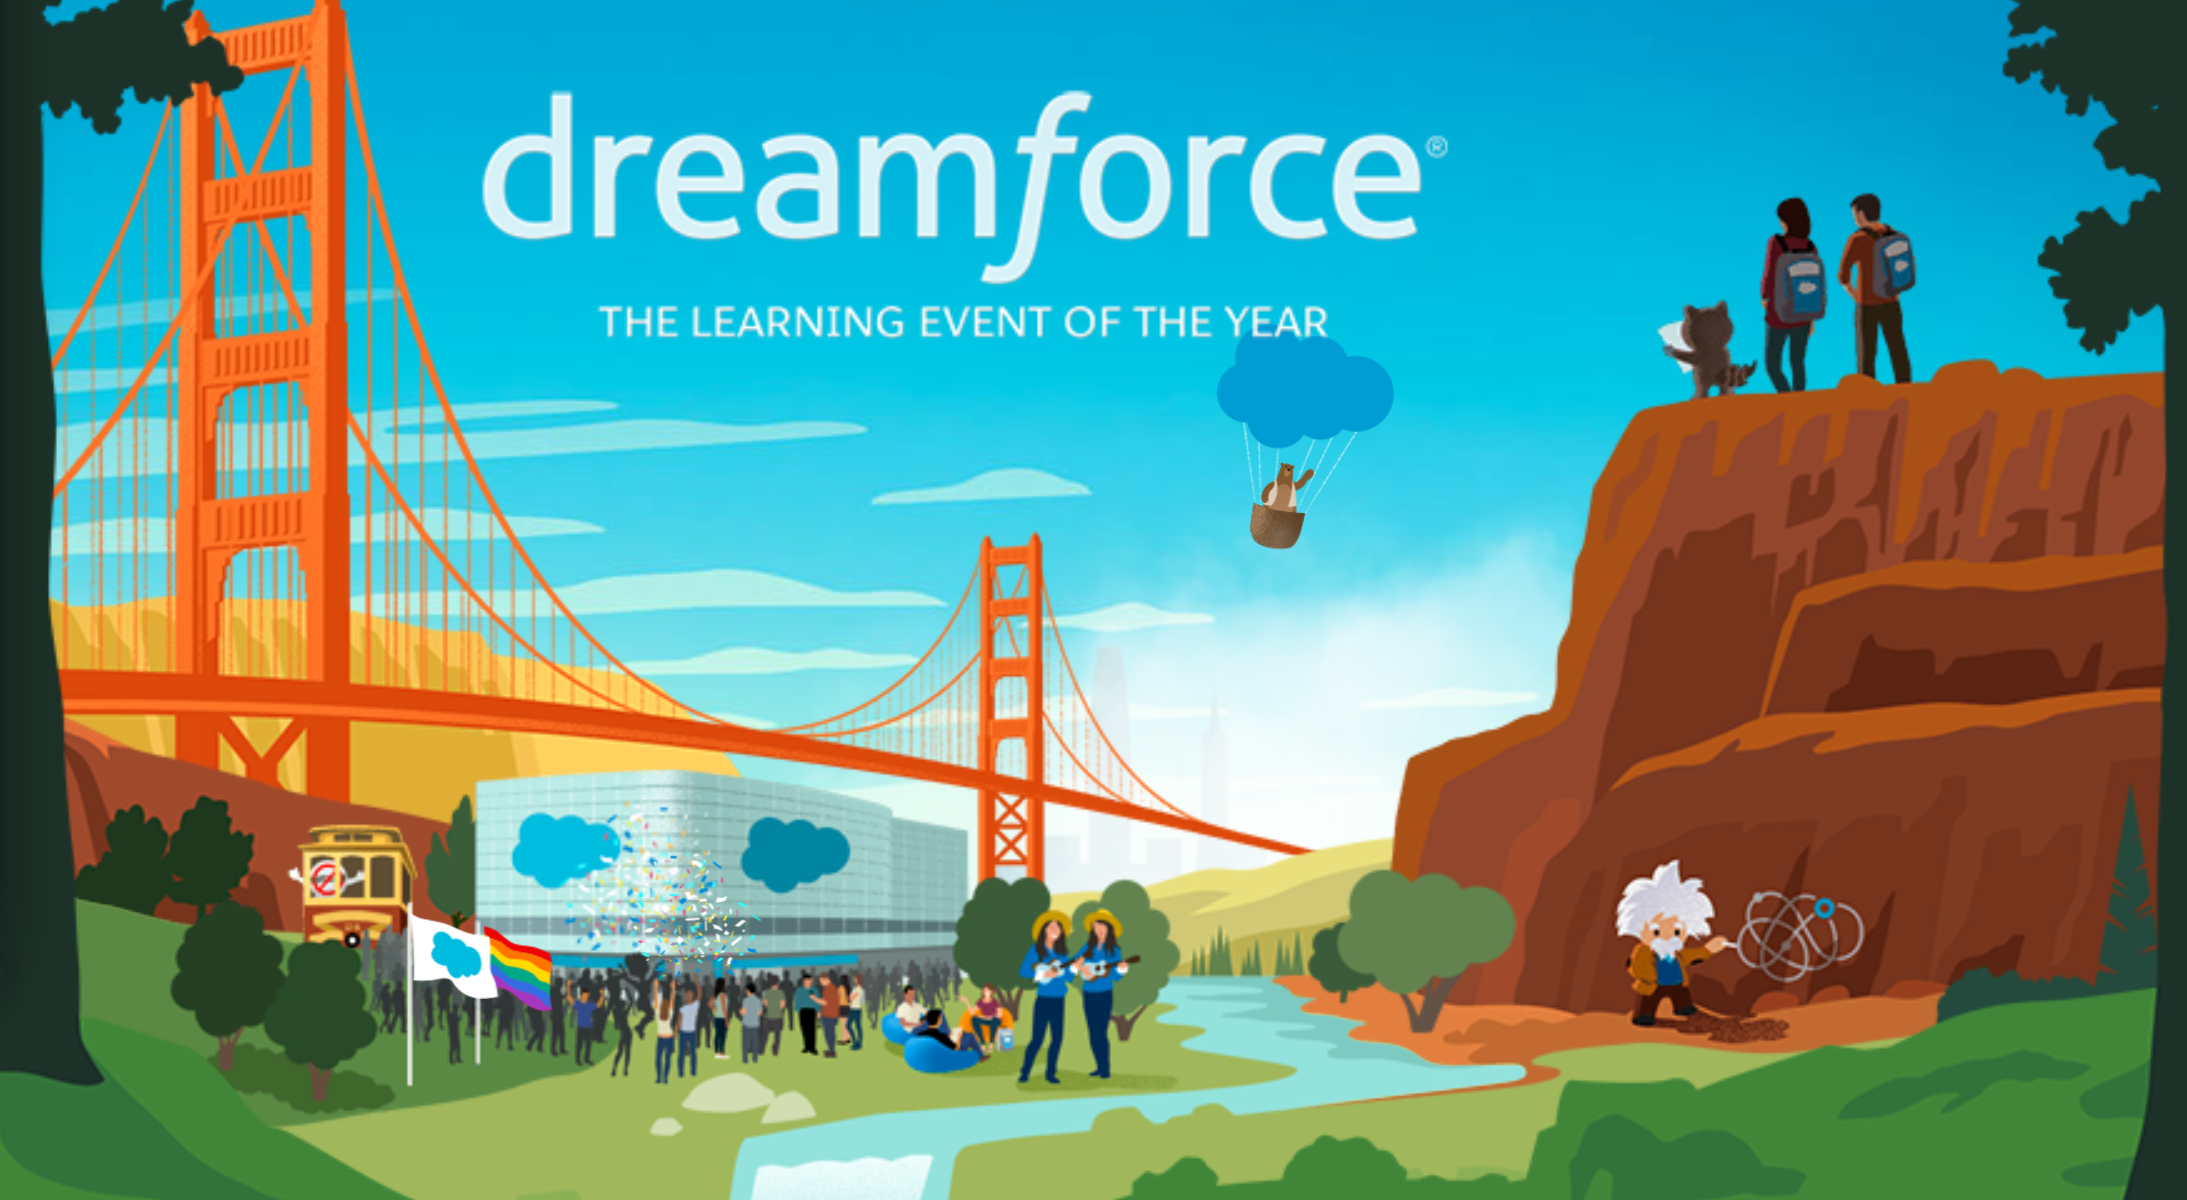 Our 3rd Dreamforce conference!